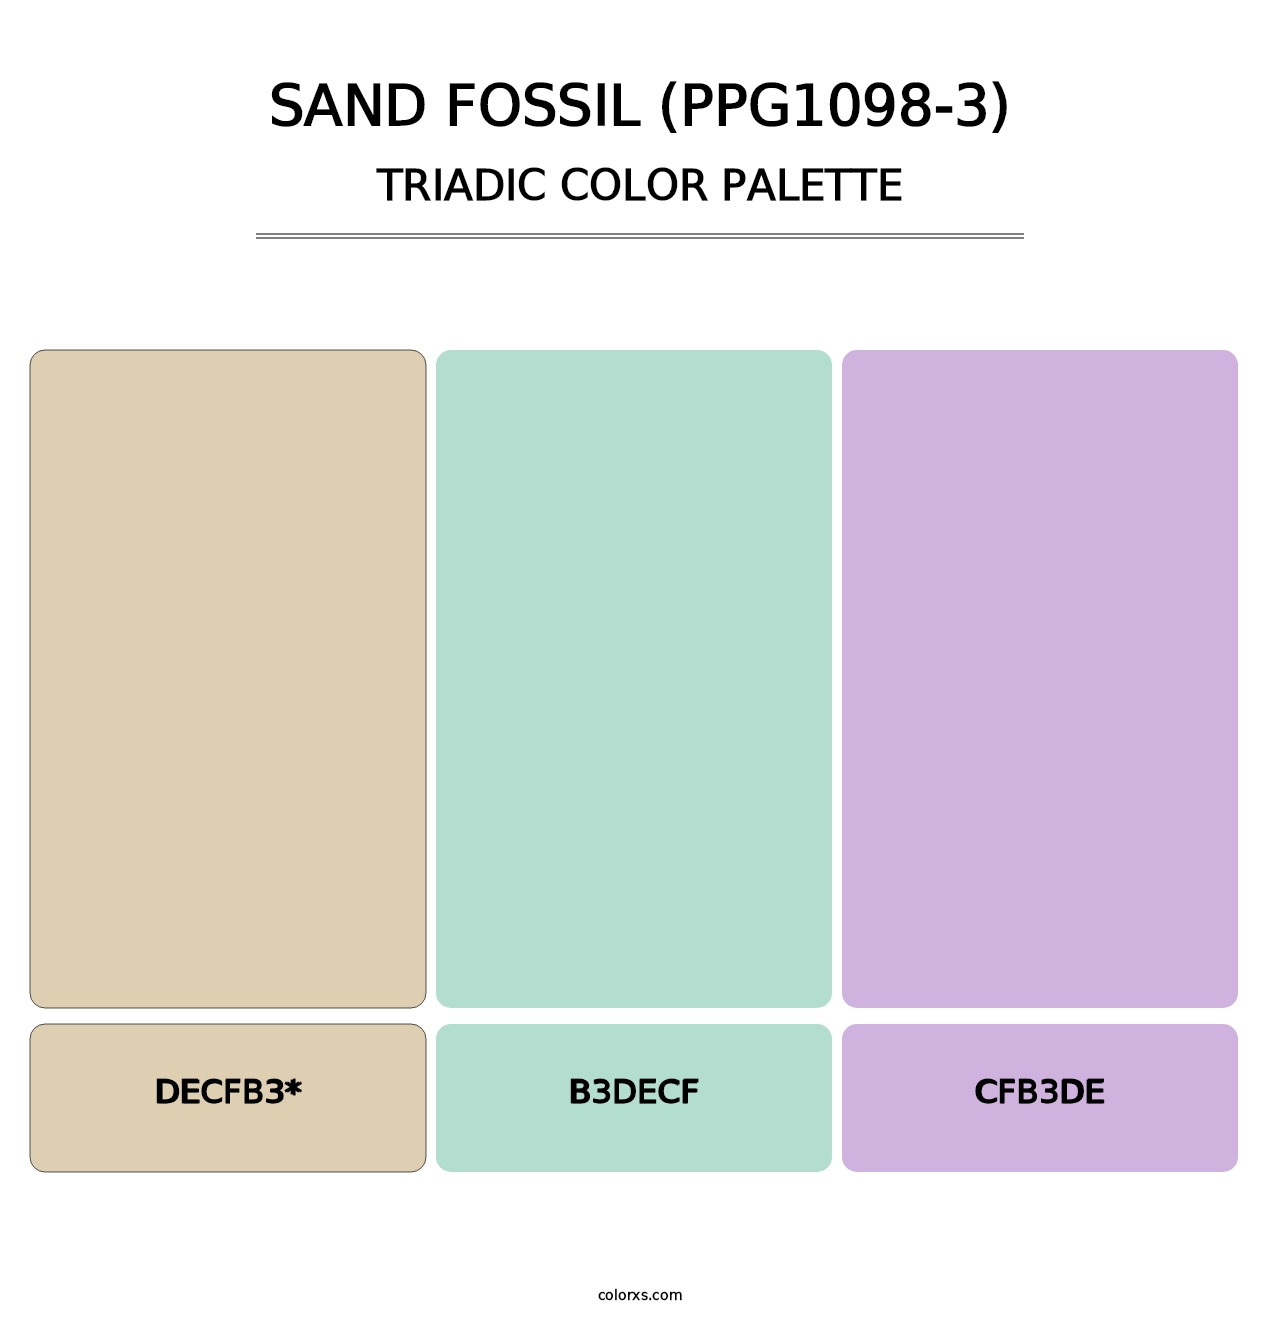 Sand Fossil (PPG1098-3) - Triadic Color Palette